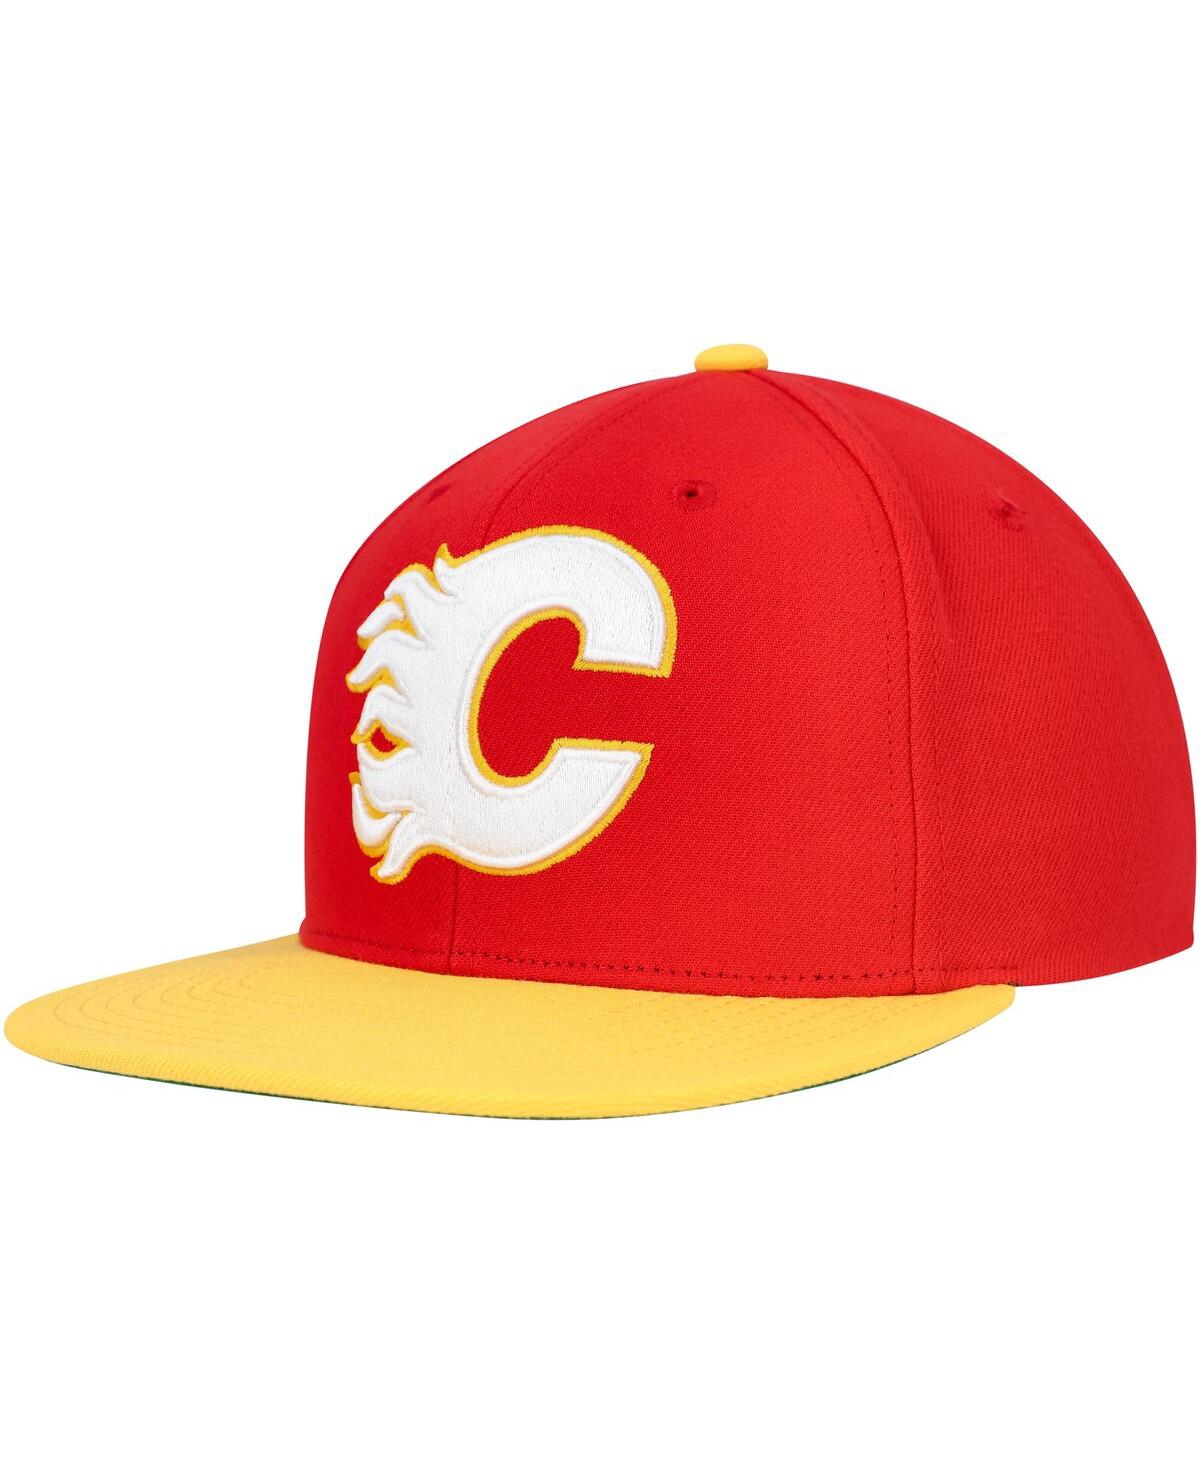 Mitchell Ness Men's Red Calgary Flames Core Team Ground 2.0 Snapback Hat - Red Yellow